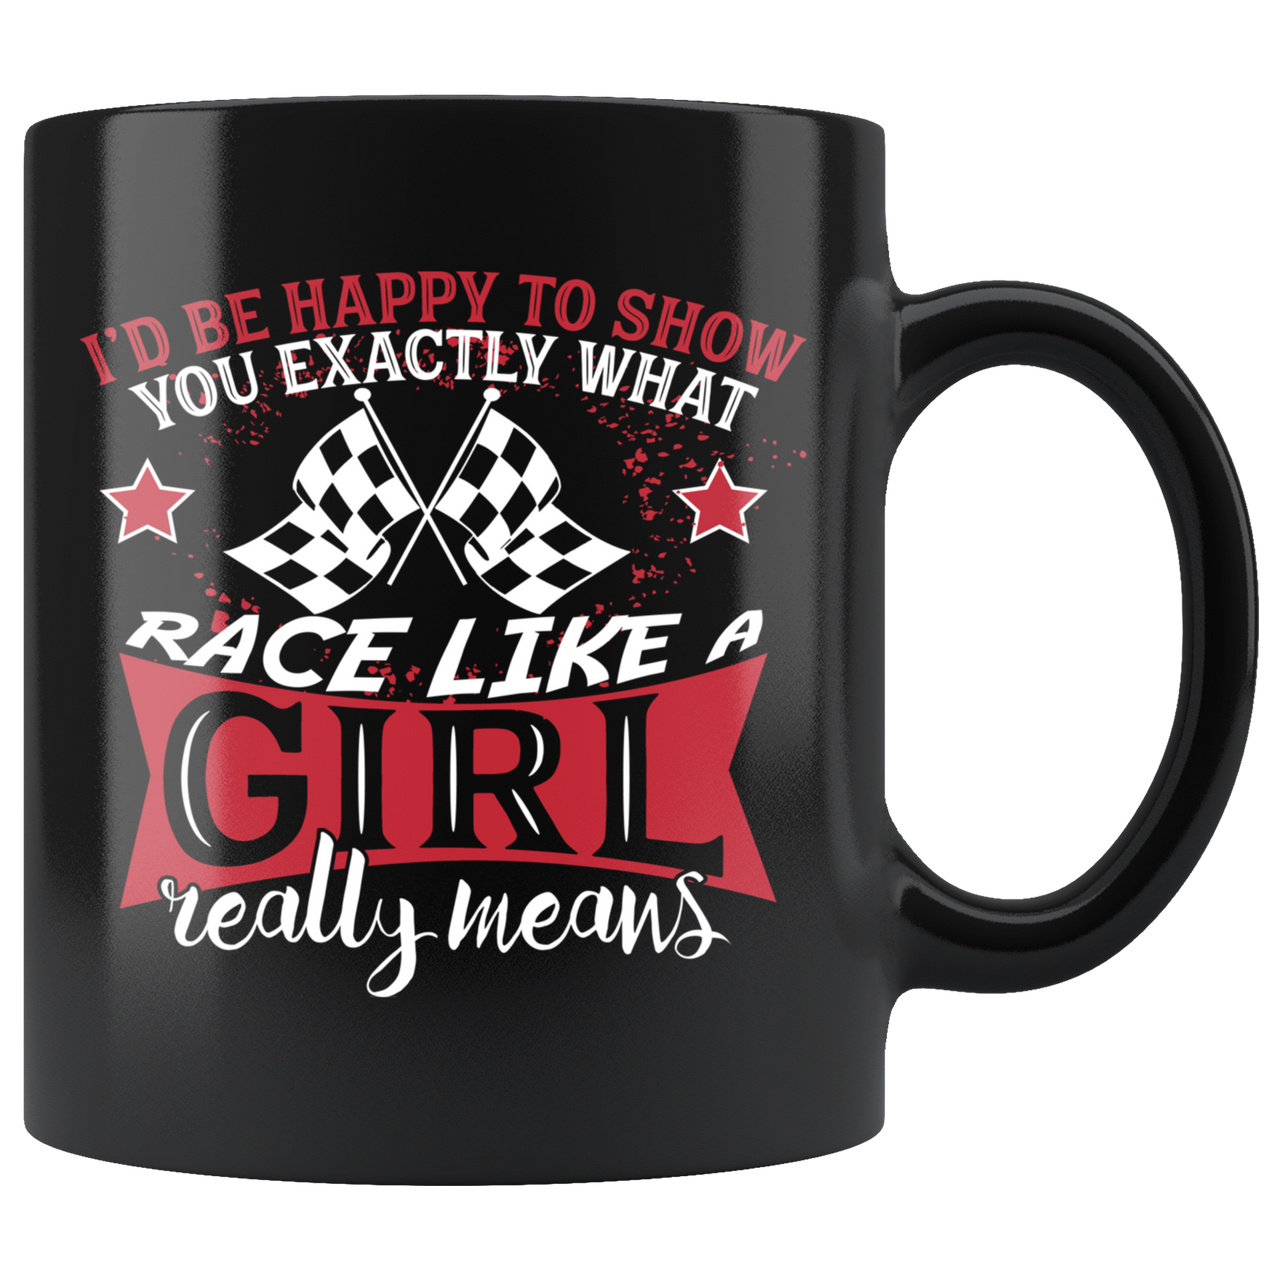 I'd Happy To Show You Exactly What Race Like A Girl Really Means Mug!